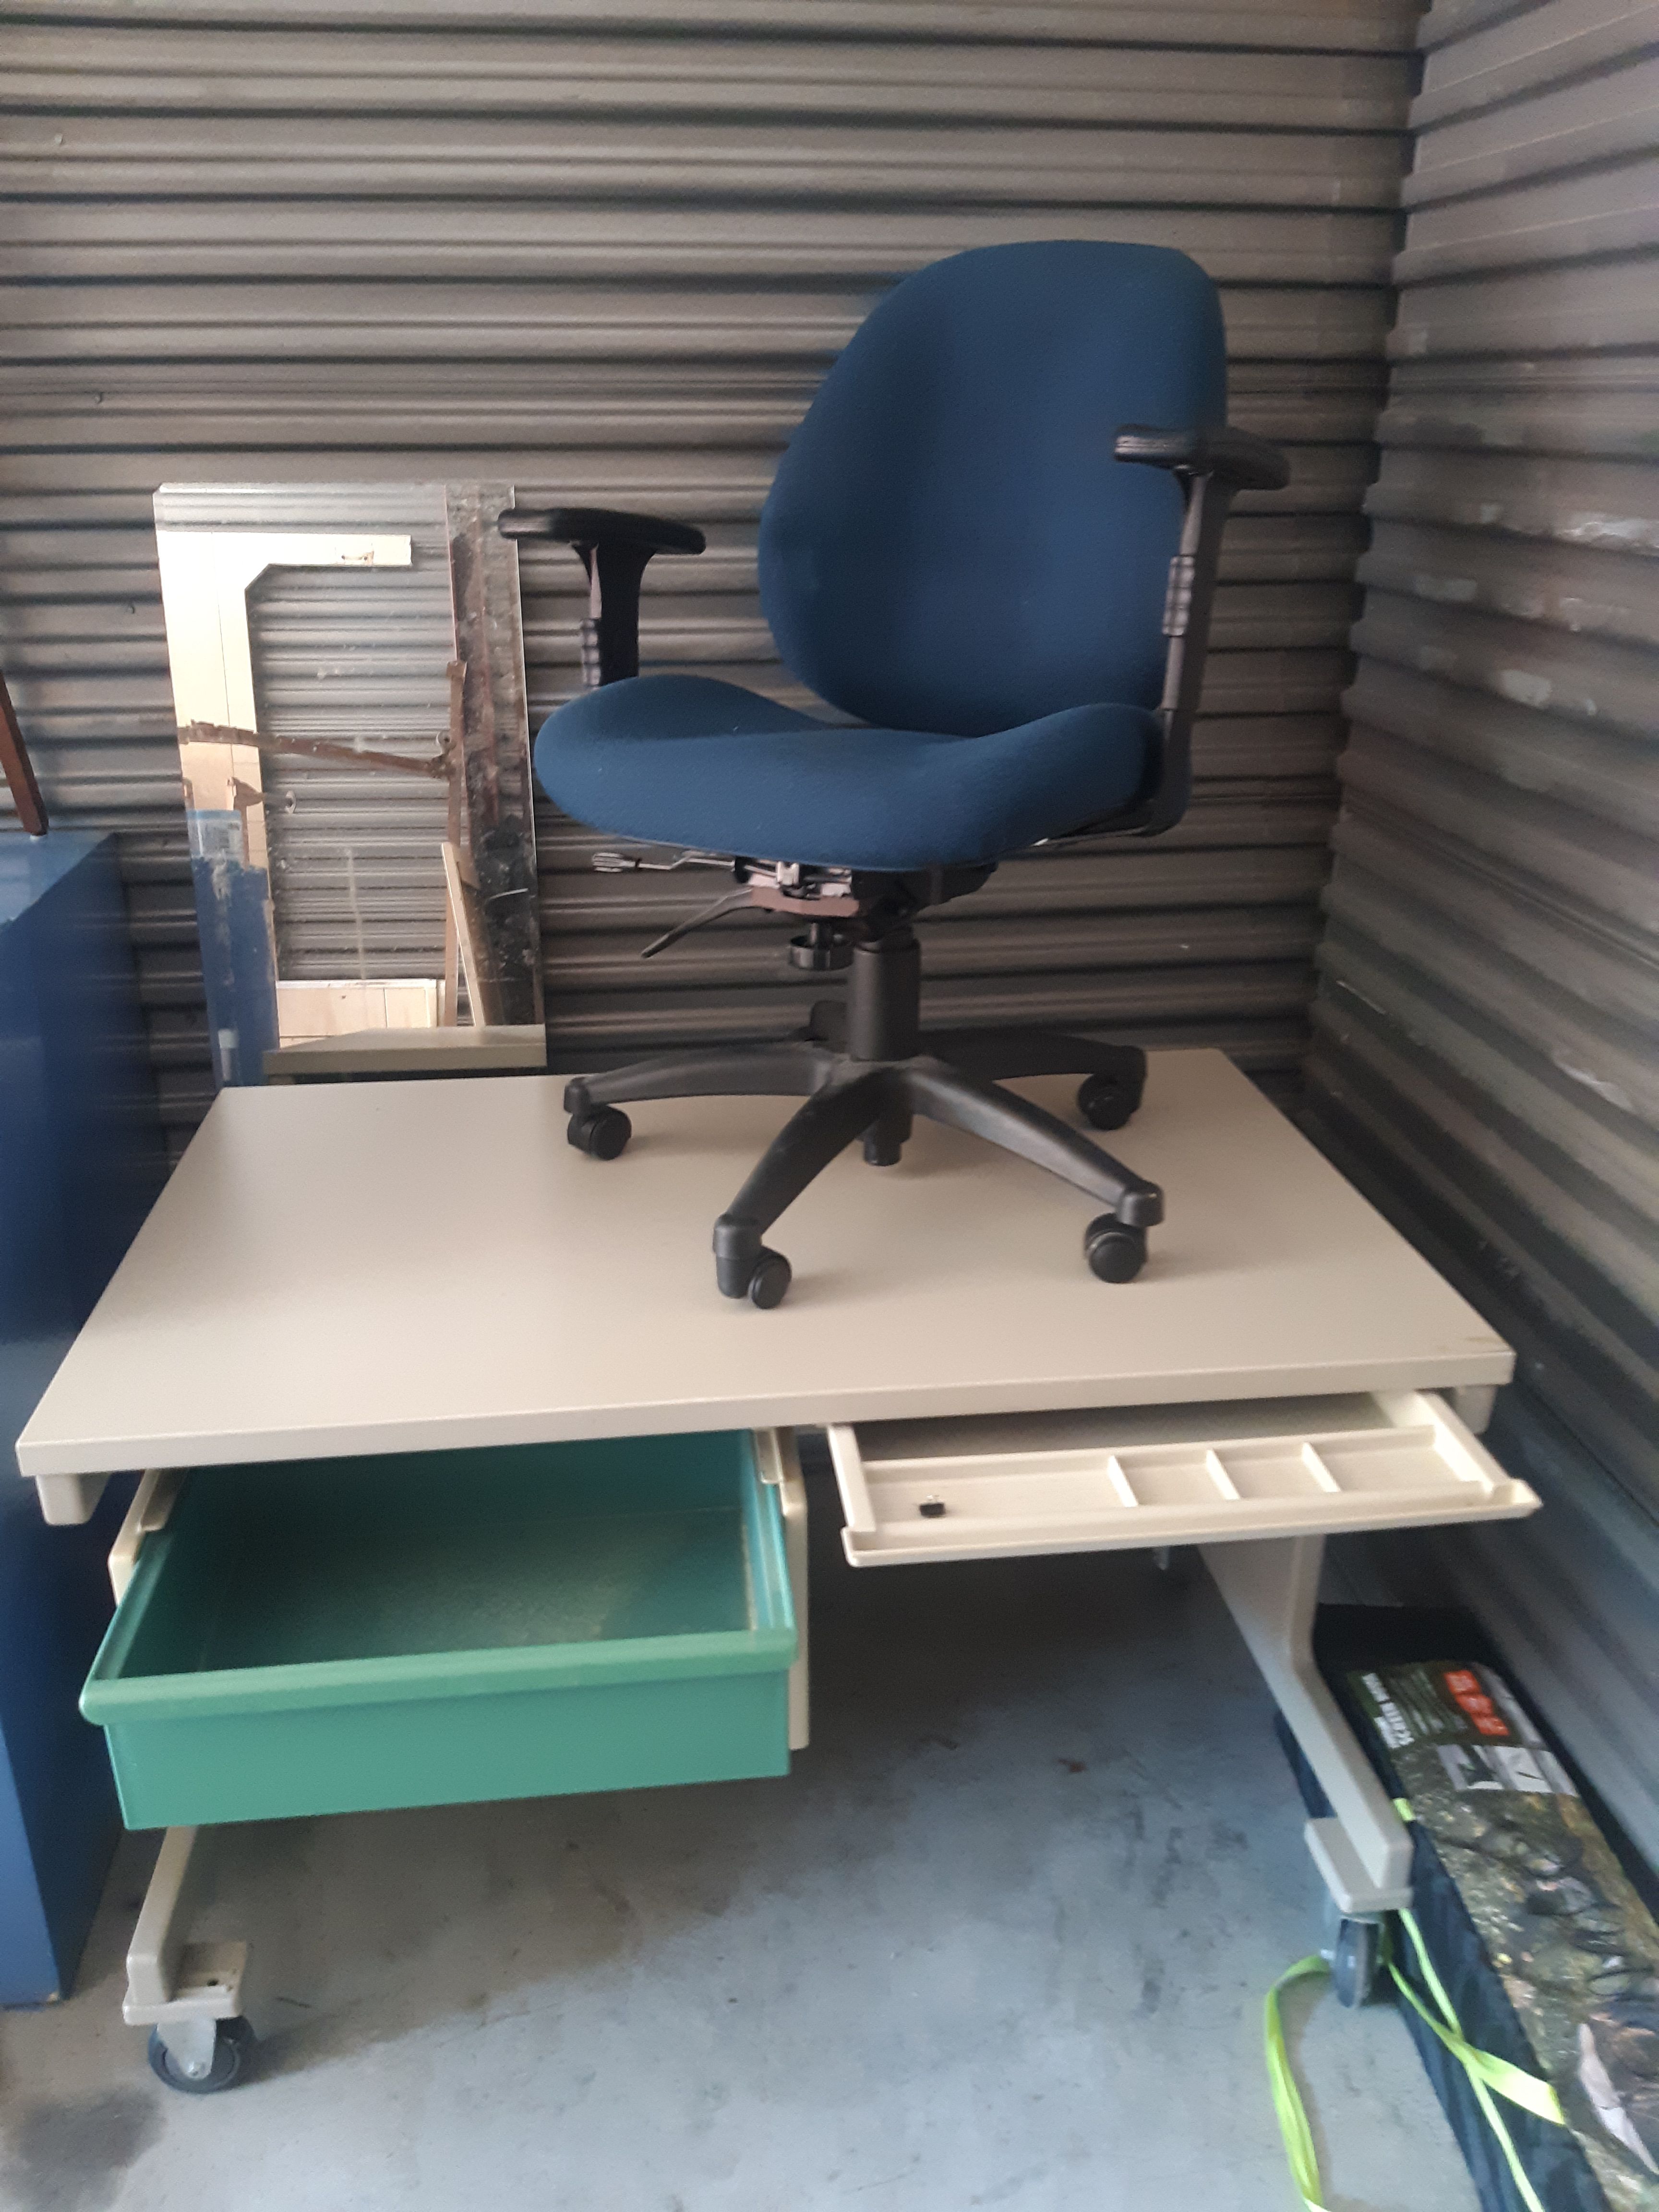 METAL INDUSTRIAL LAB COMPUTER OFFICE DESK ON WHEELS/CASTERS AND ERGONOMIC CHAIR